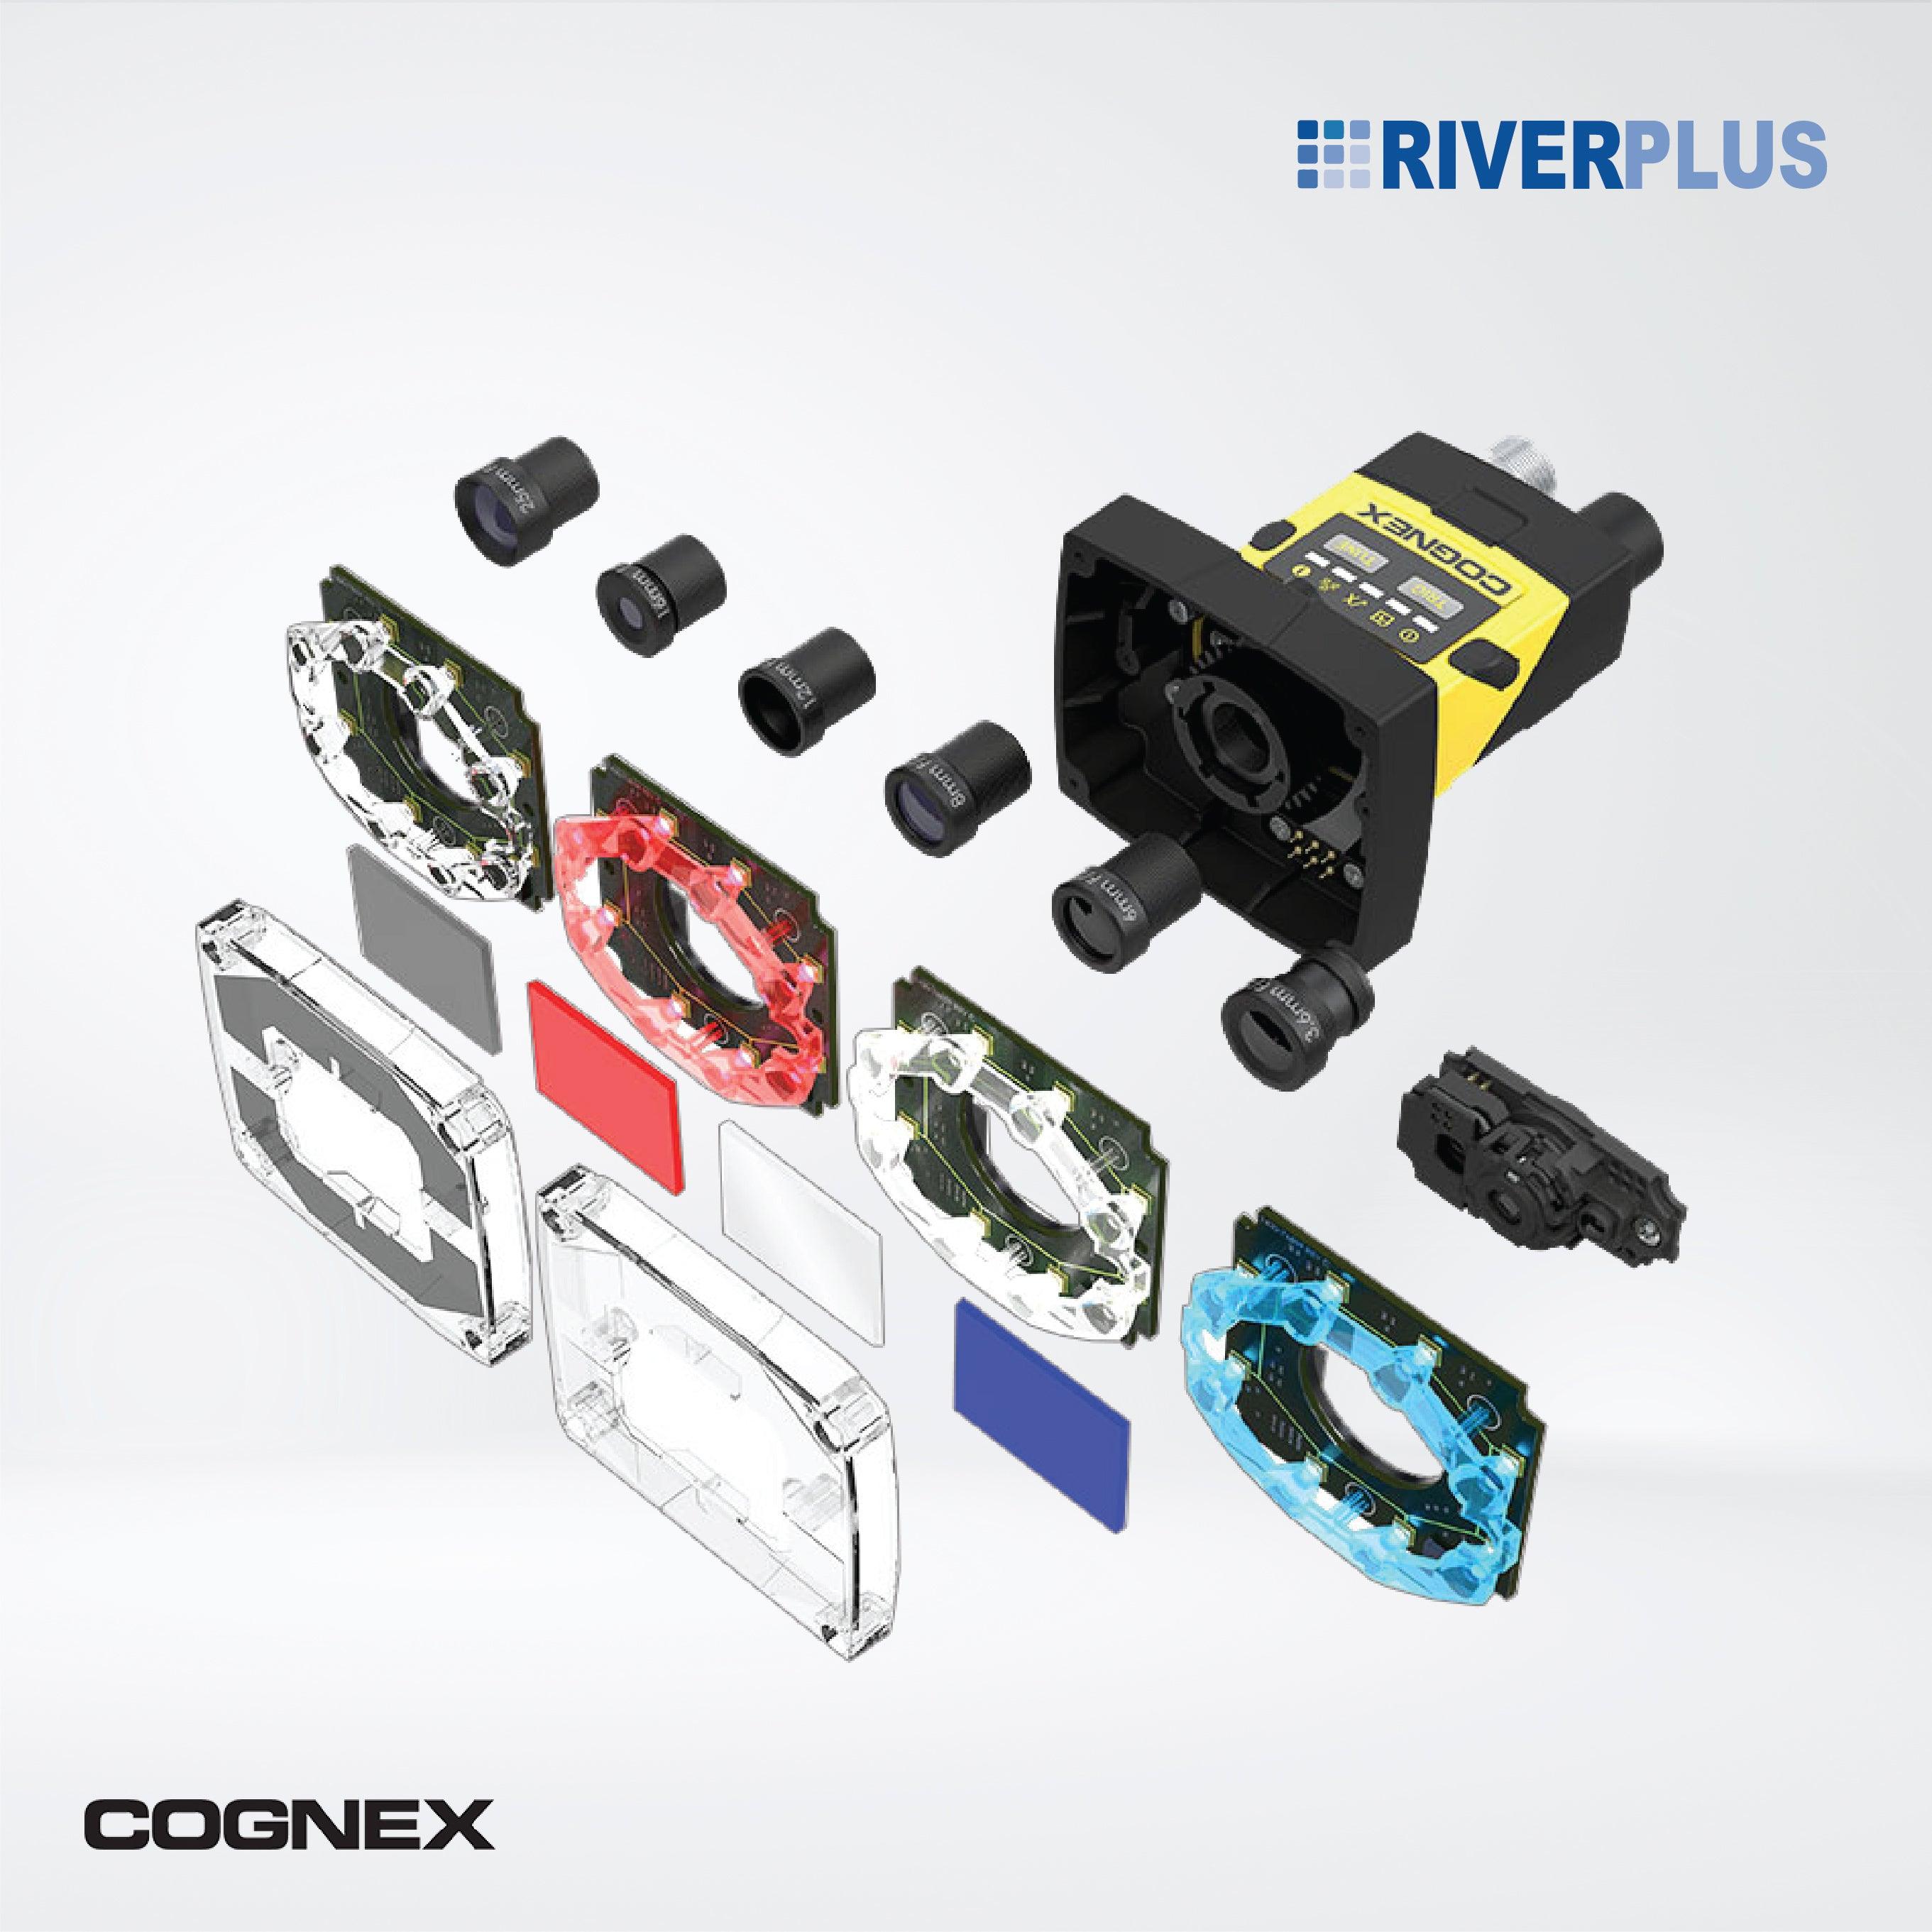 In-Sight 2000 vision sensors , The power of an In-Sight vision system with the simplicity - Riverplus